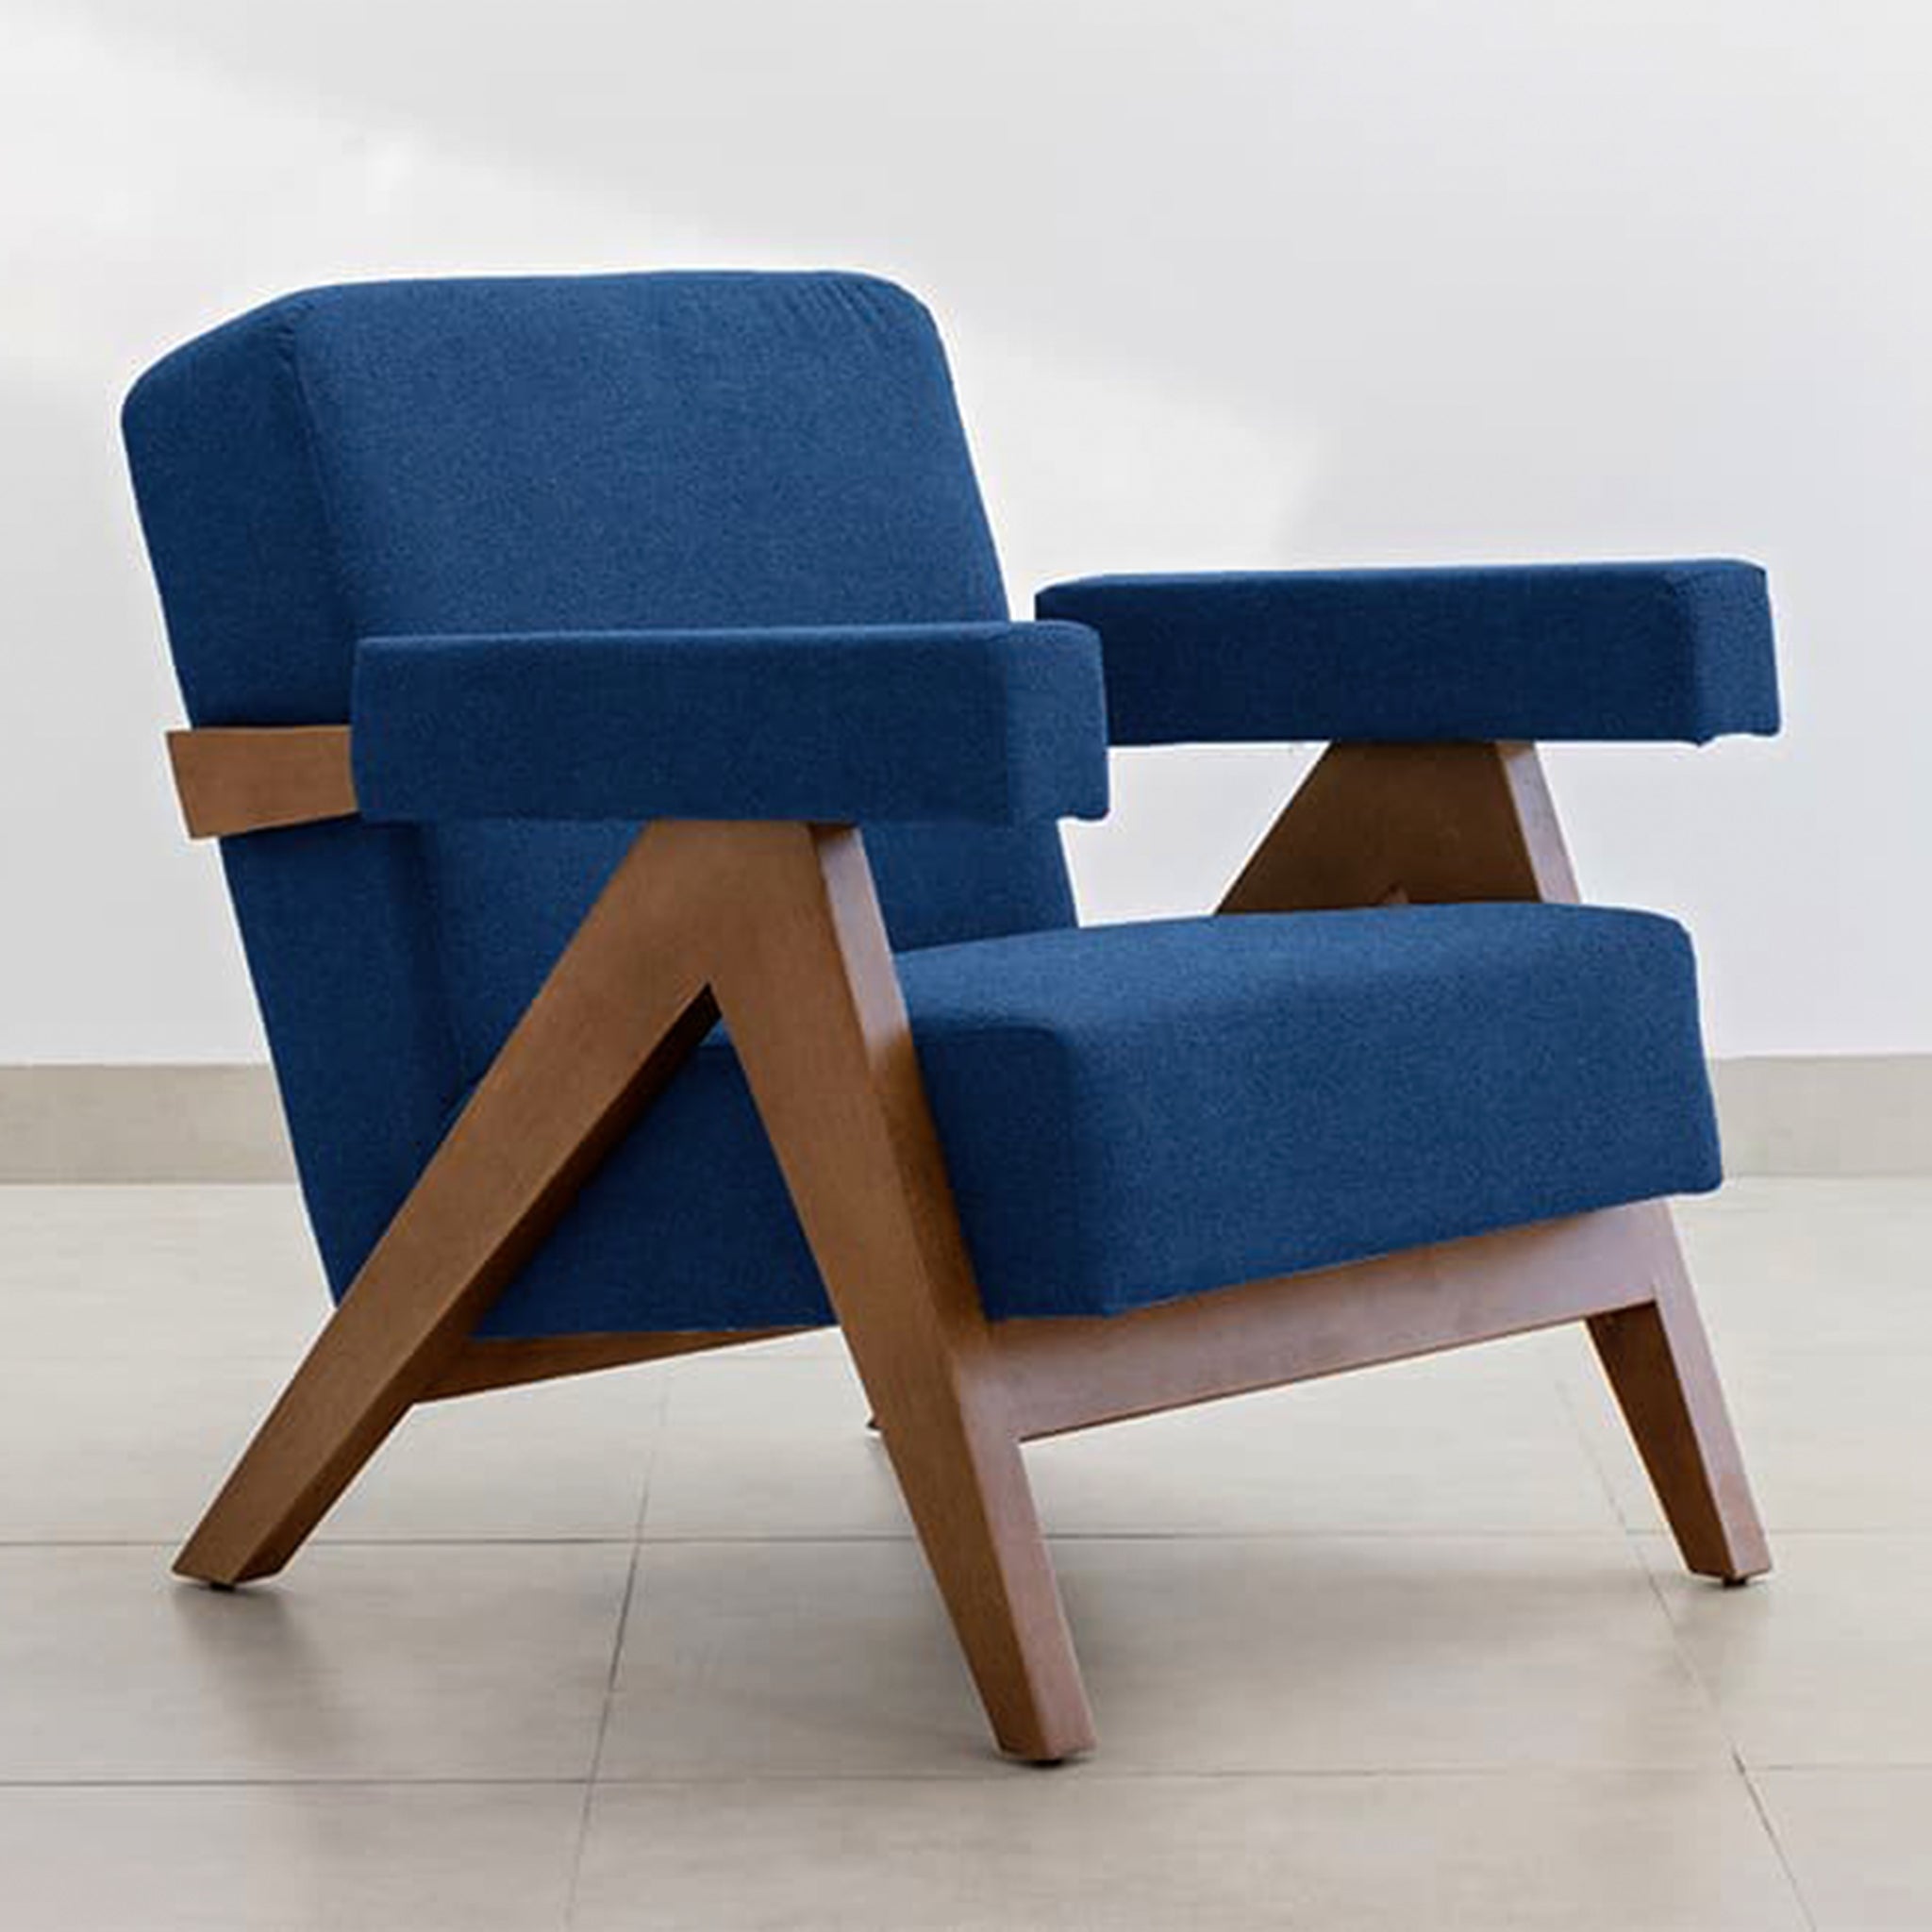 The Pierre Accent Chair with comfortable teal cushions and wooden arms.